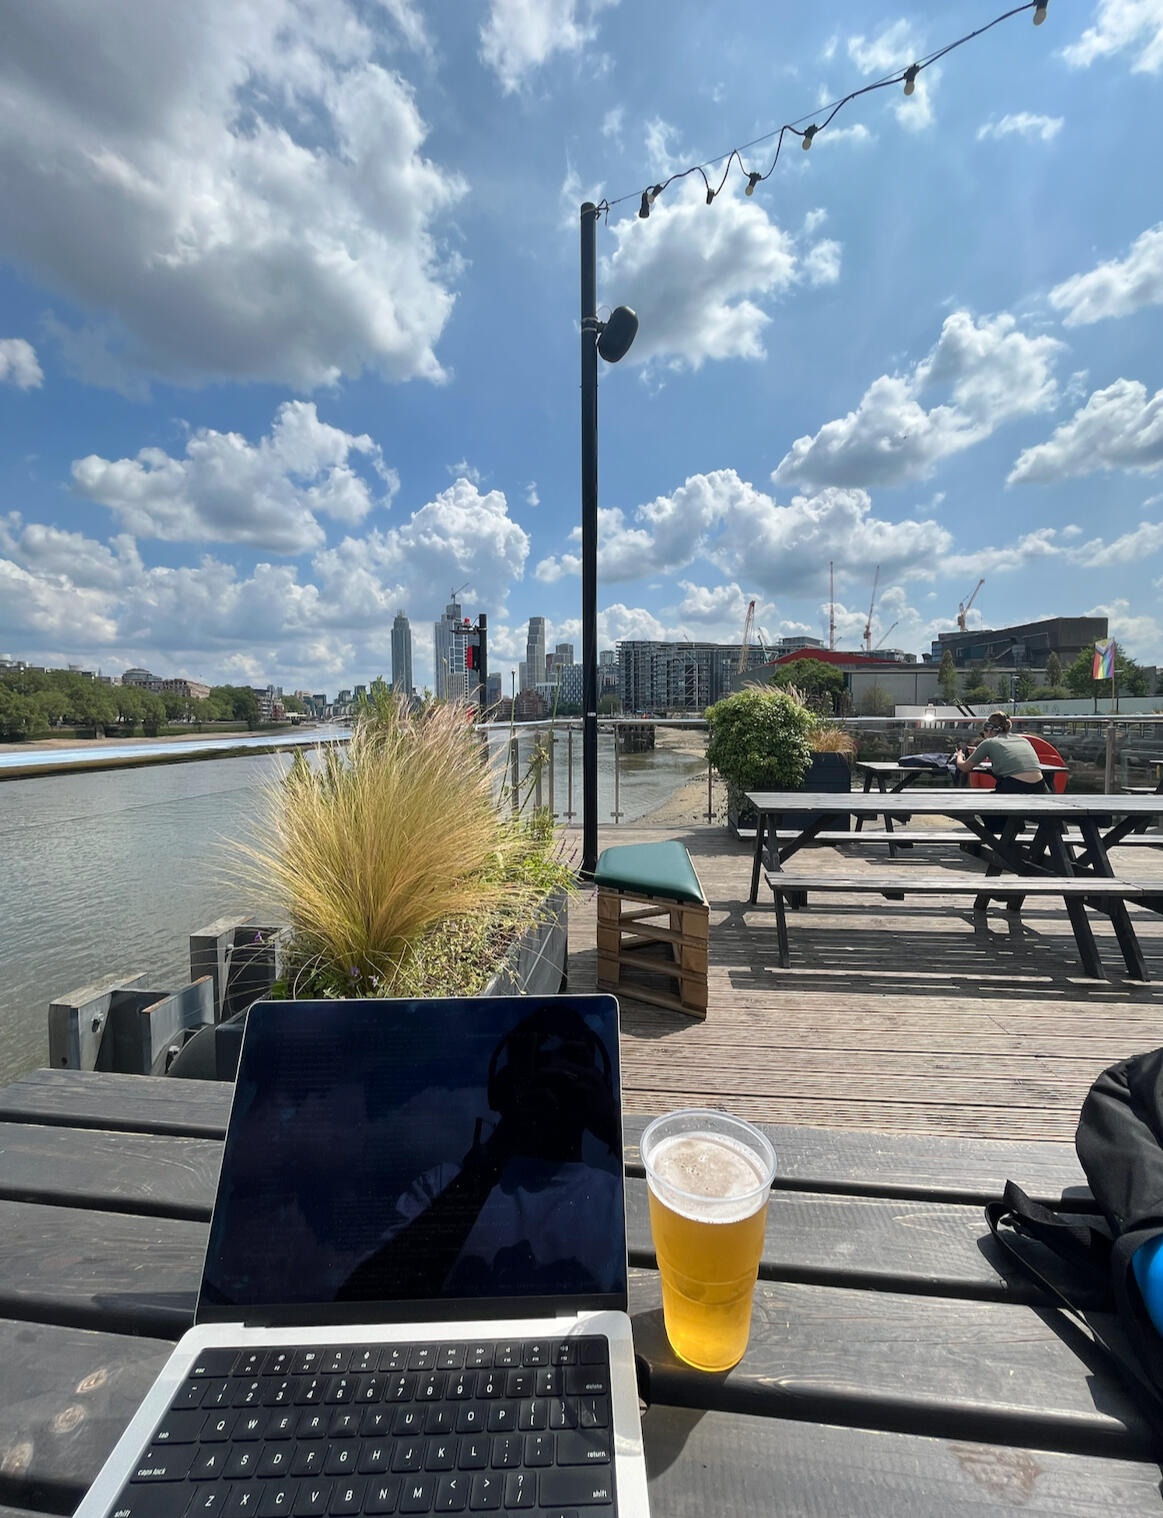 Working on a laptop next to the water